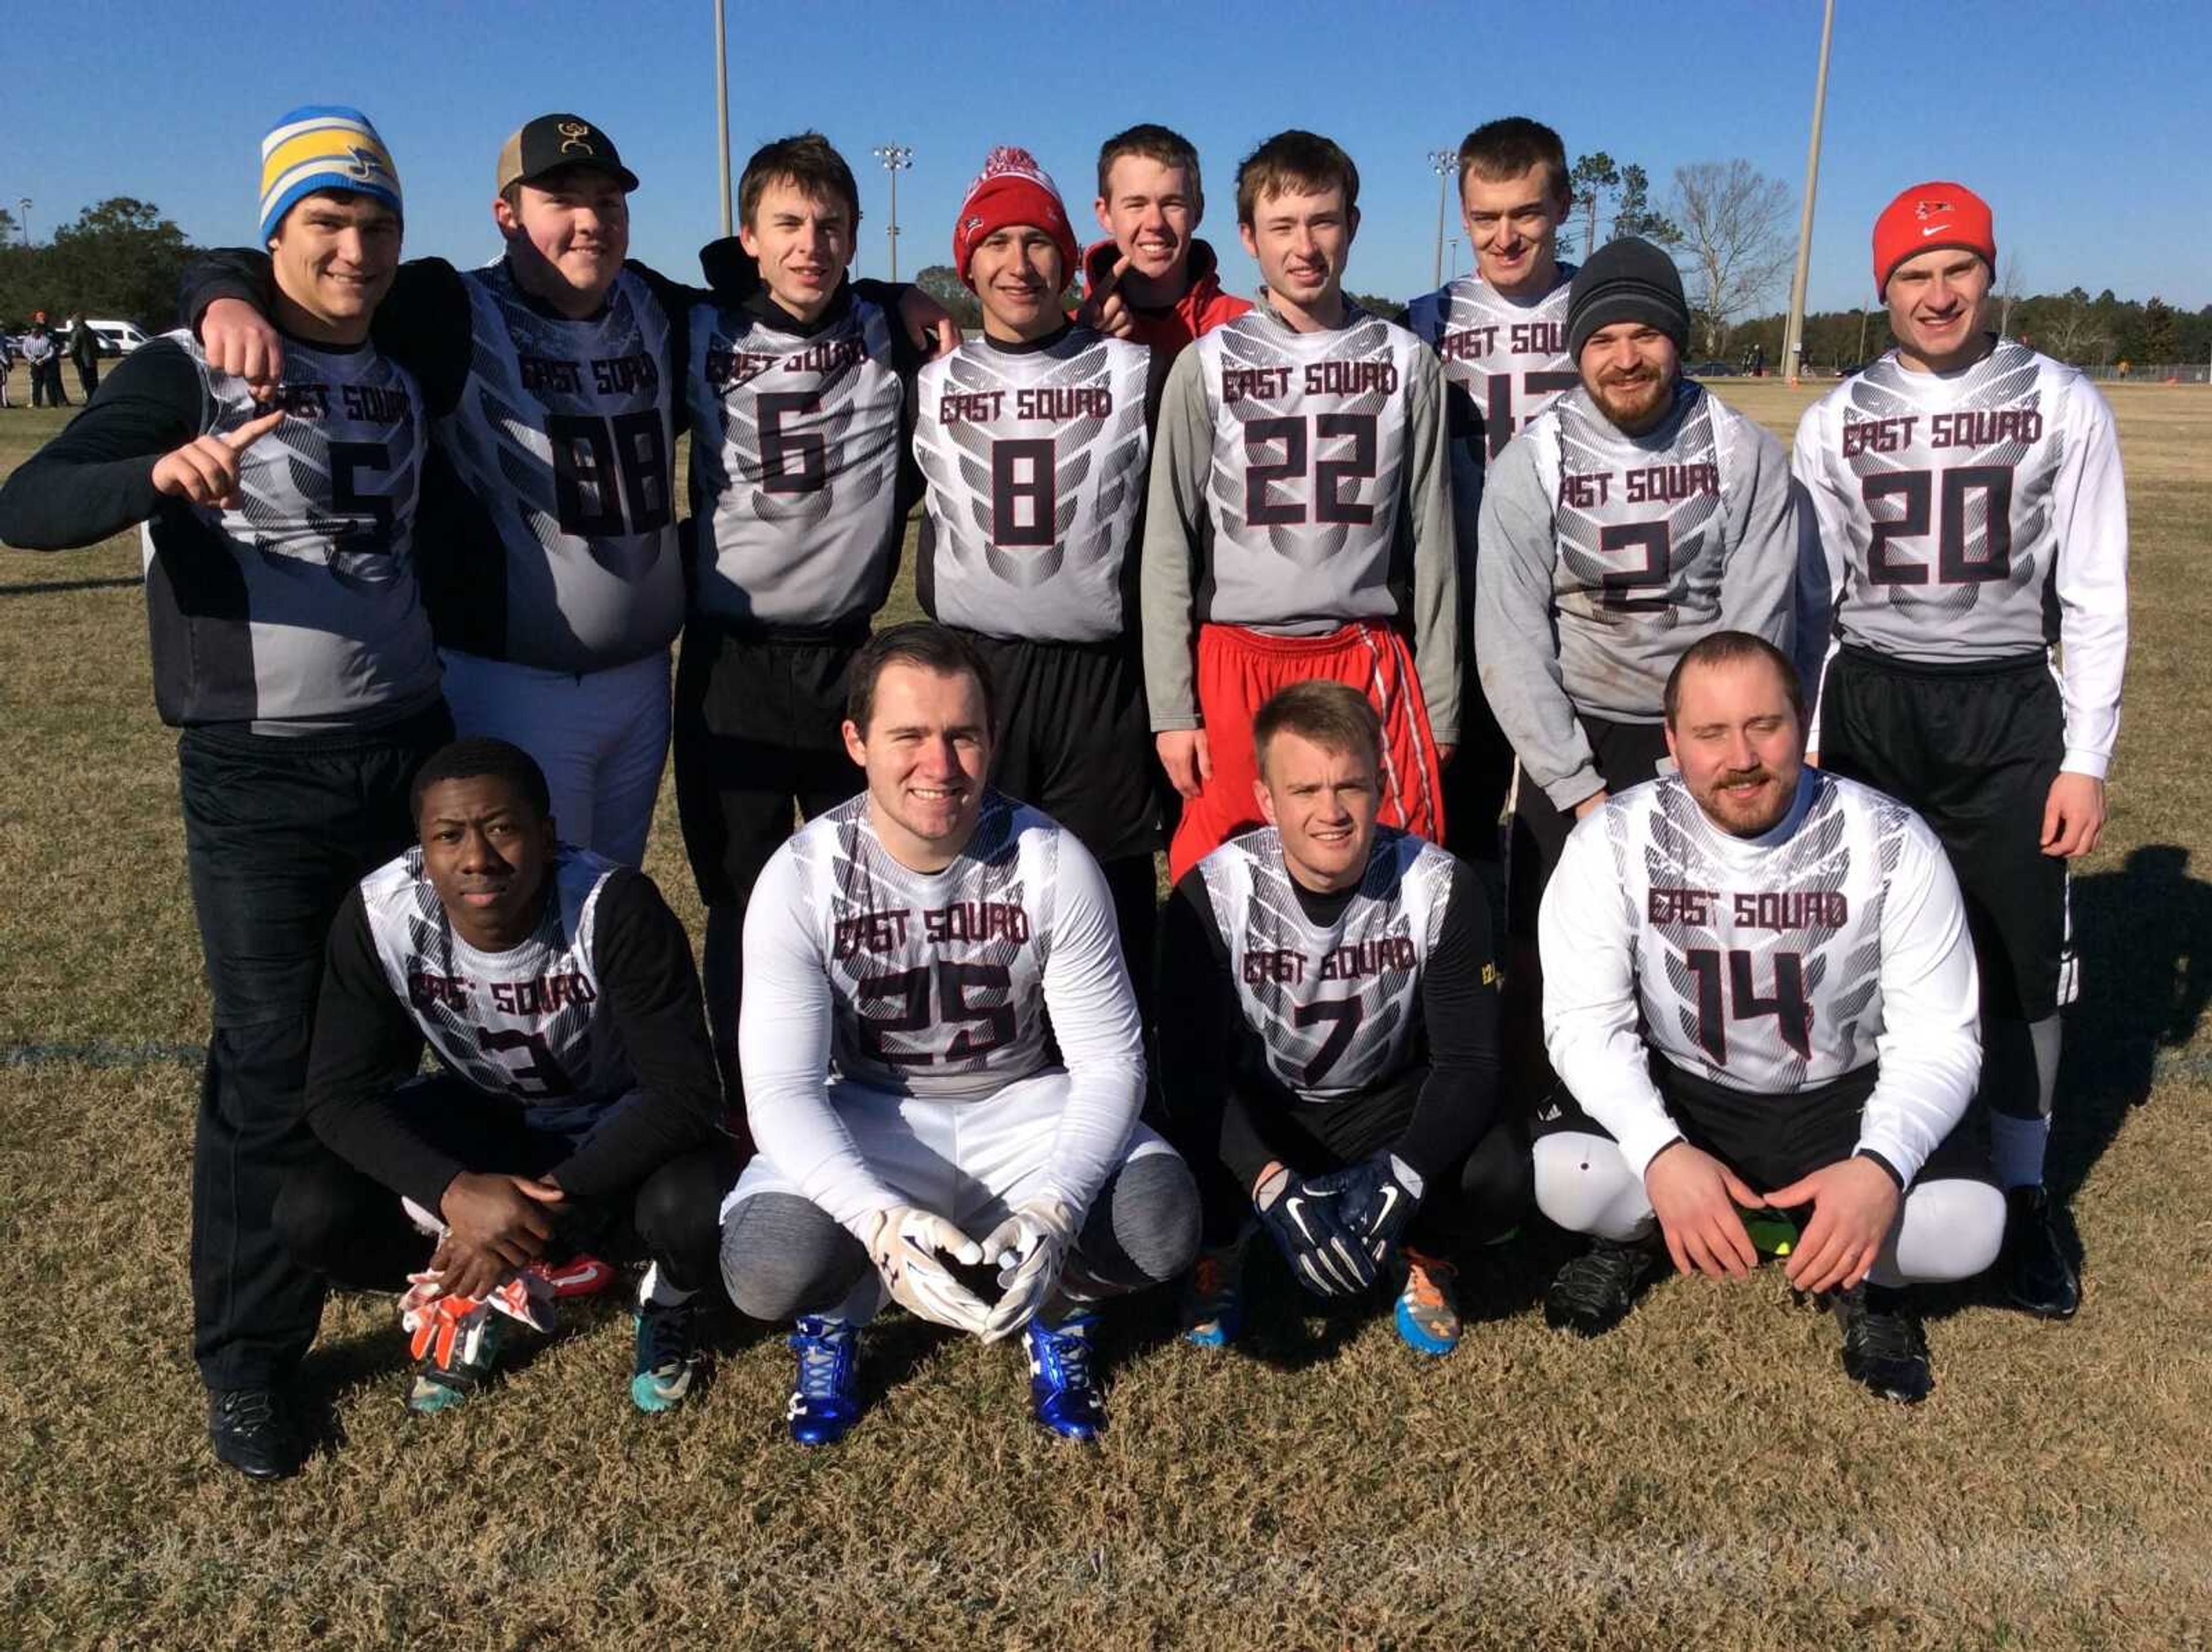 Southeast flag football team finishes 13th in the nation